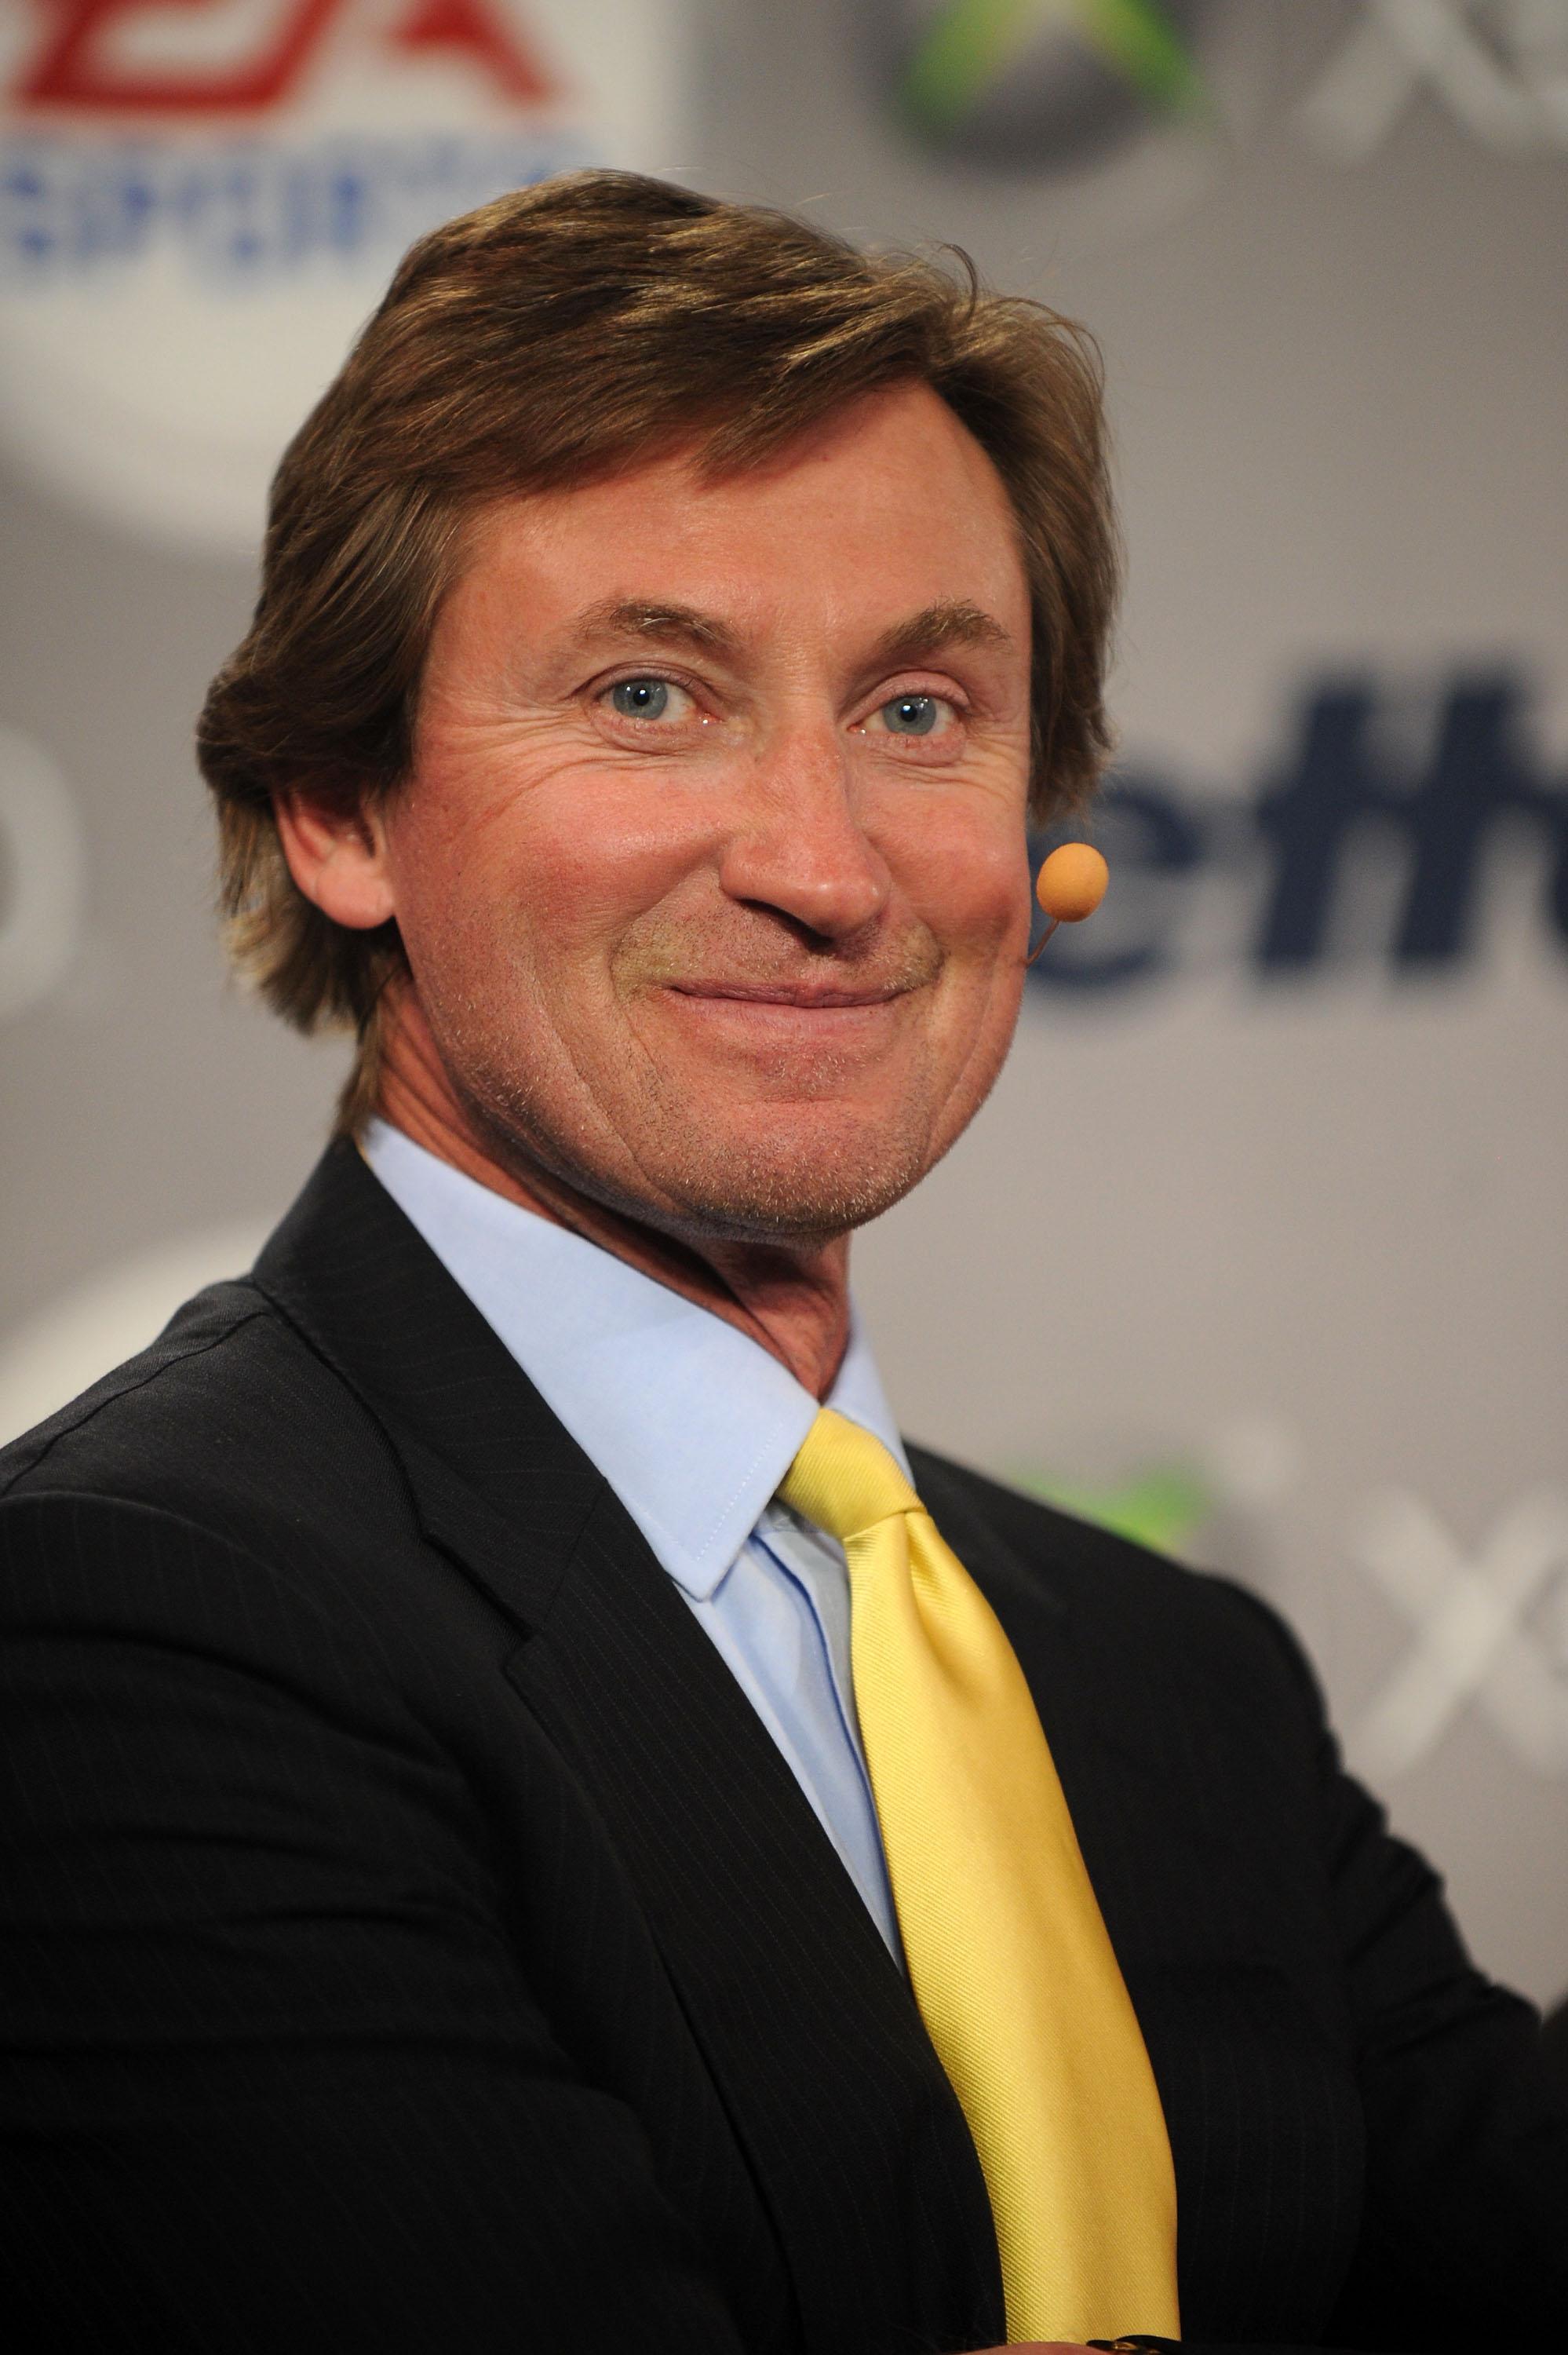 NEW YORK - APRIL 14:  Hockey Hall of Famer Wayne Gretzky attends the Gillette - EA SPORTS Champions of Gaming Global Finals at ARENA Event Space on April 14, 2010 in New York City.  (Photo by Bryan Bedder/Getty Images)